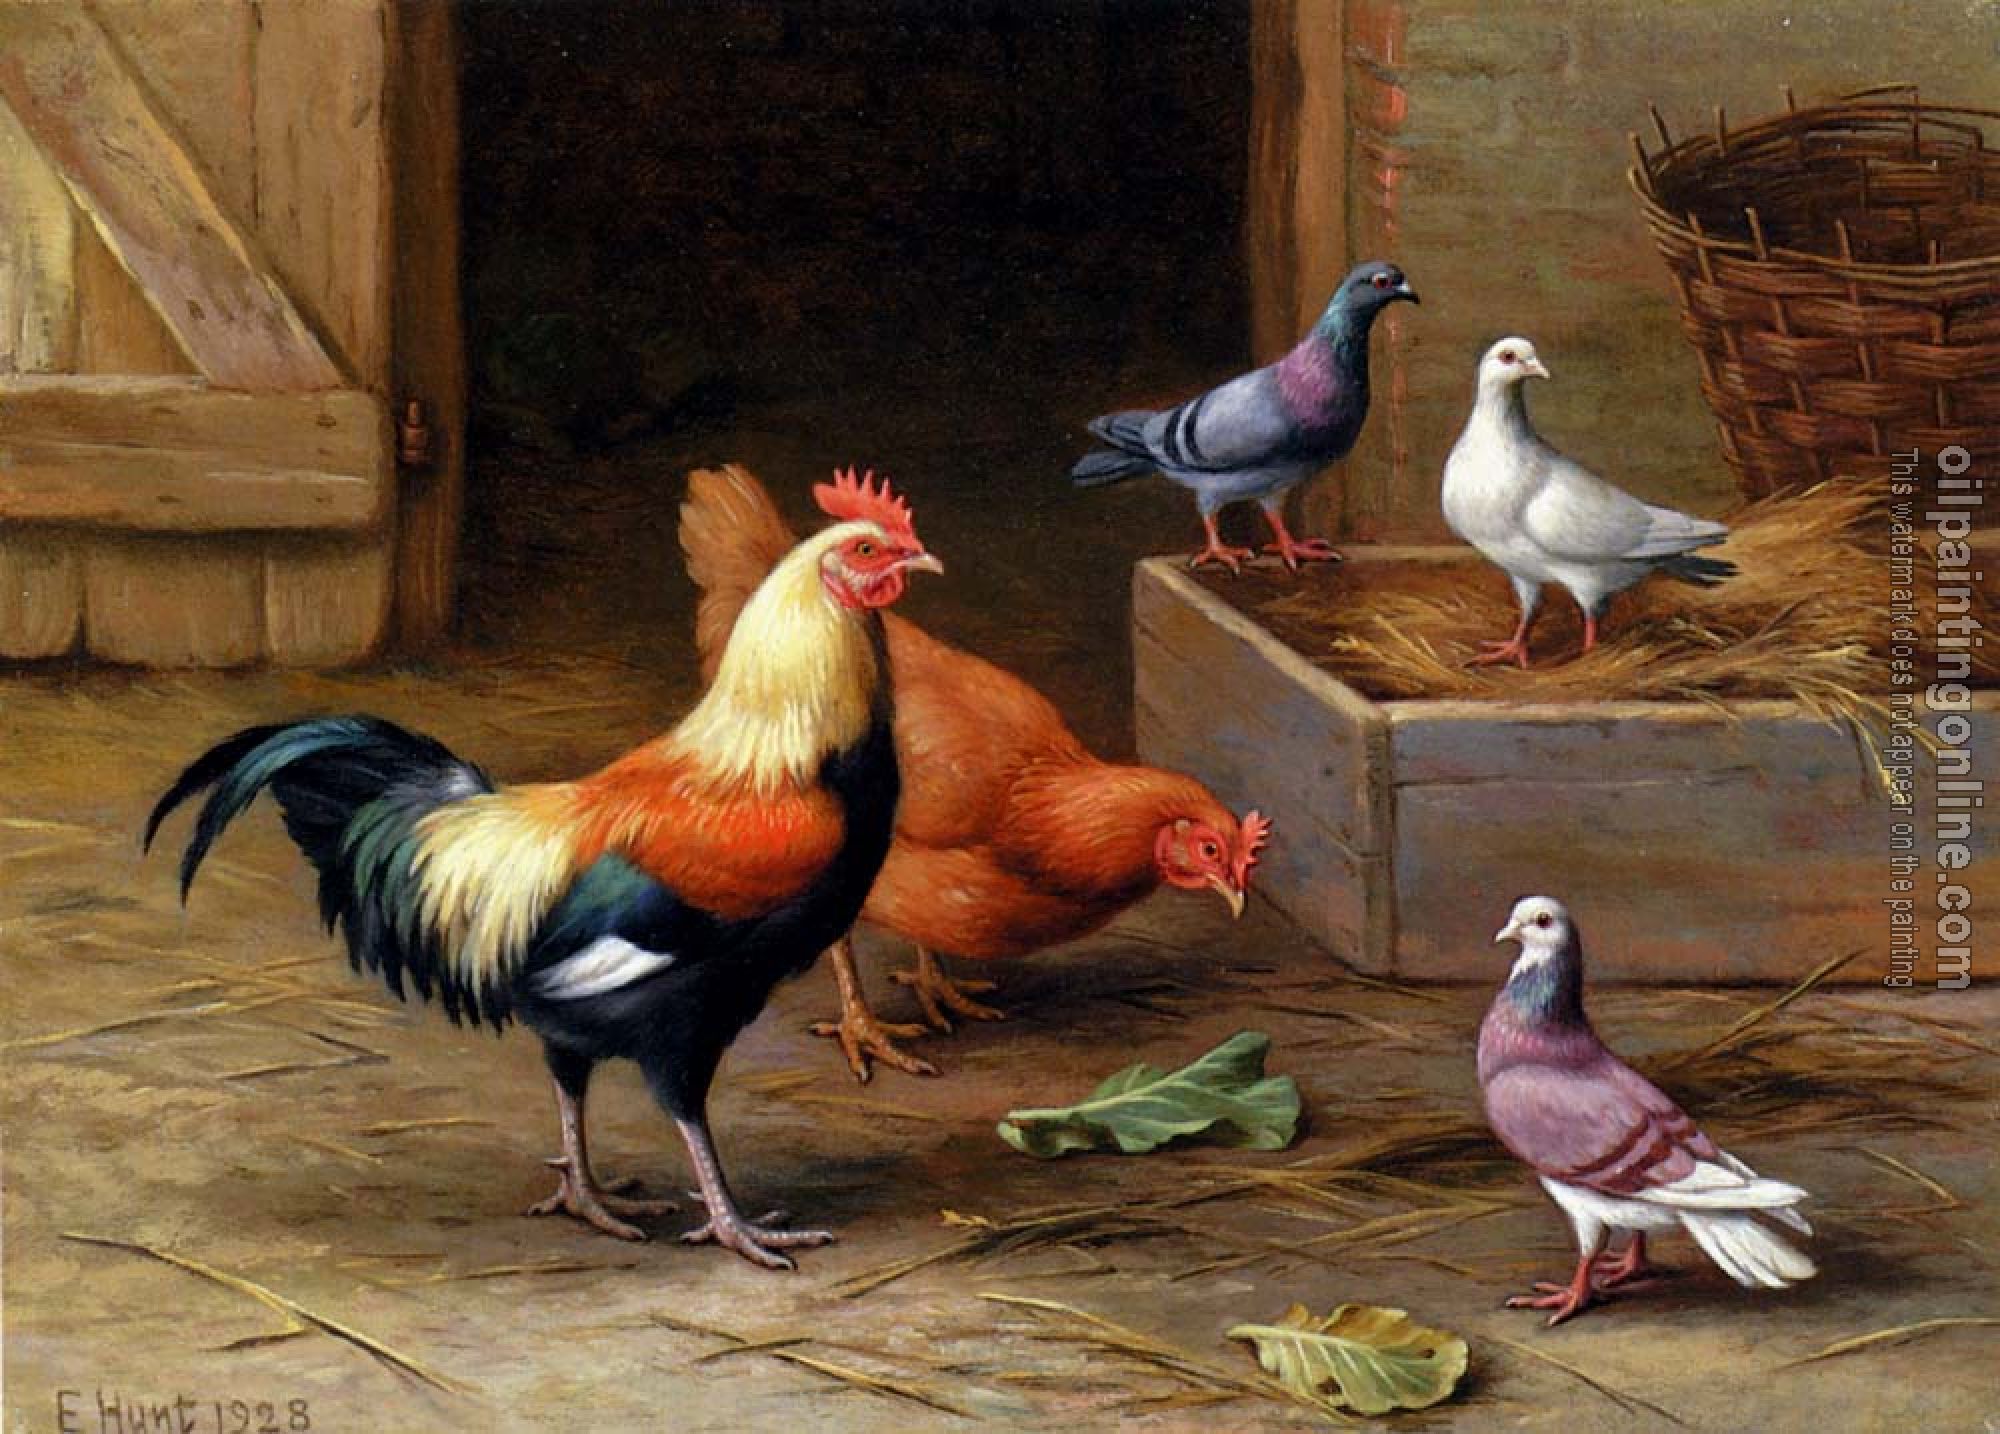 Edgar Hunt - Chickens Pigeons And A Dove